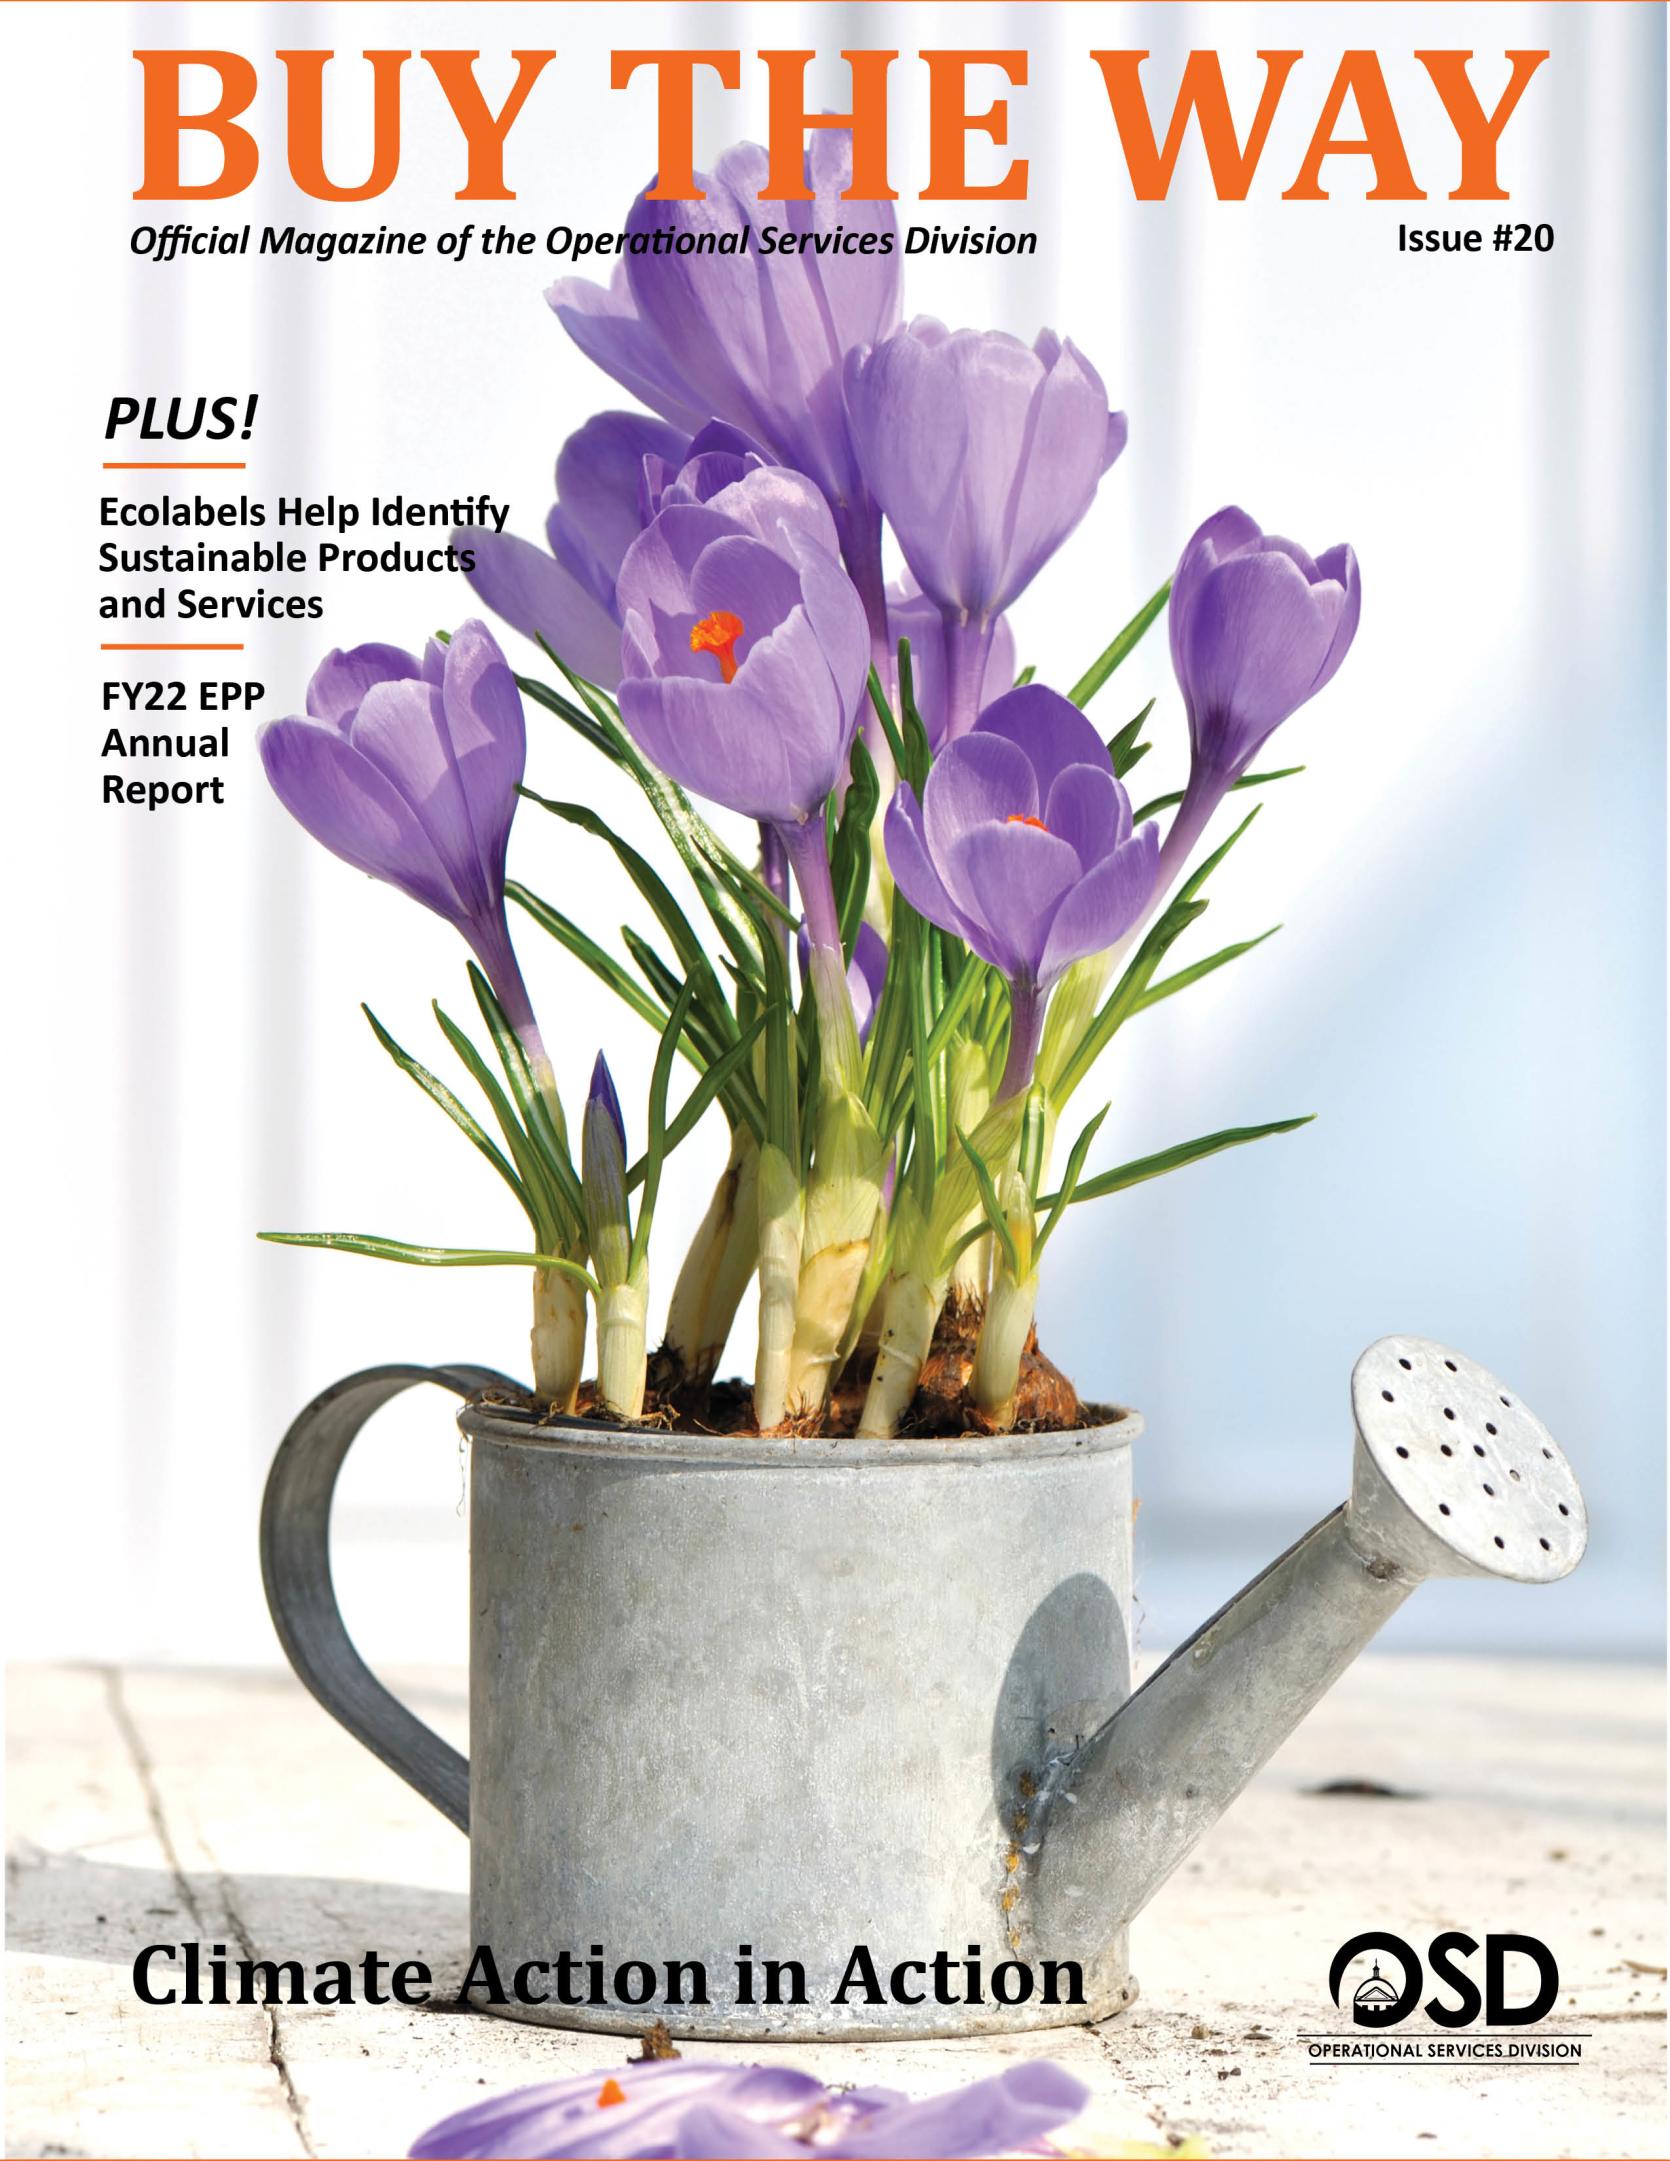 Buy the Way issue #20 cover: purple flowers in a watering can. 